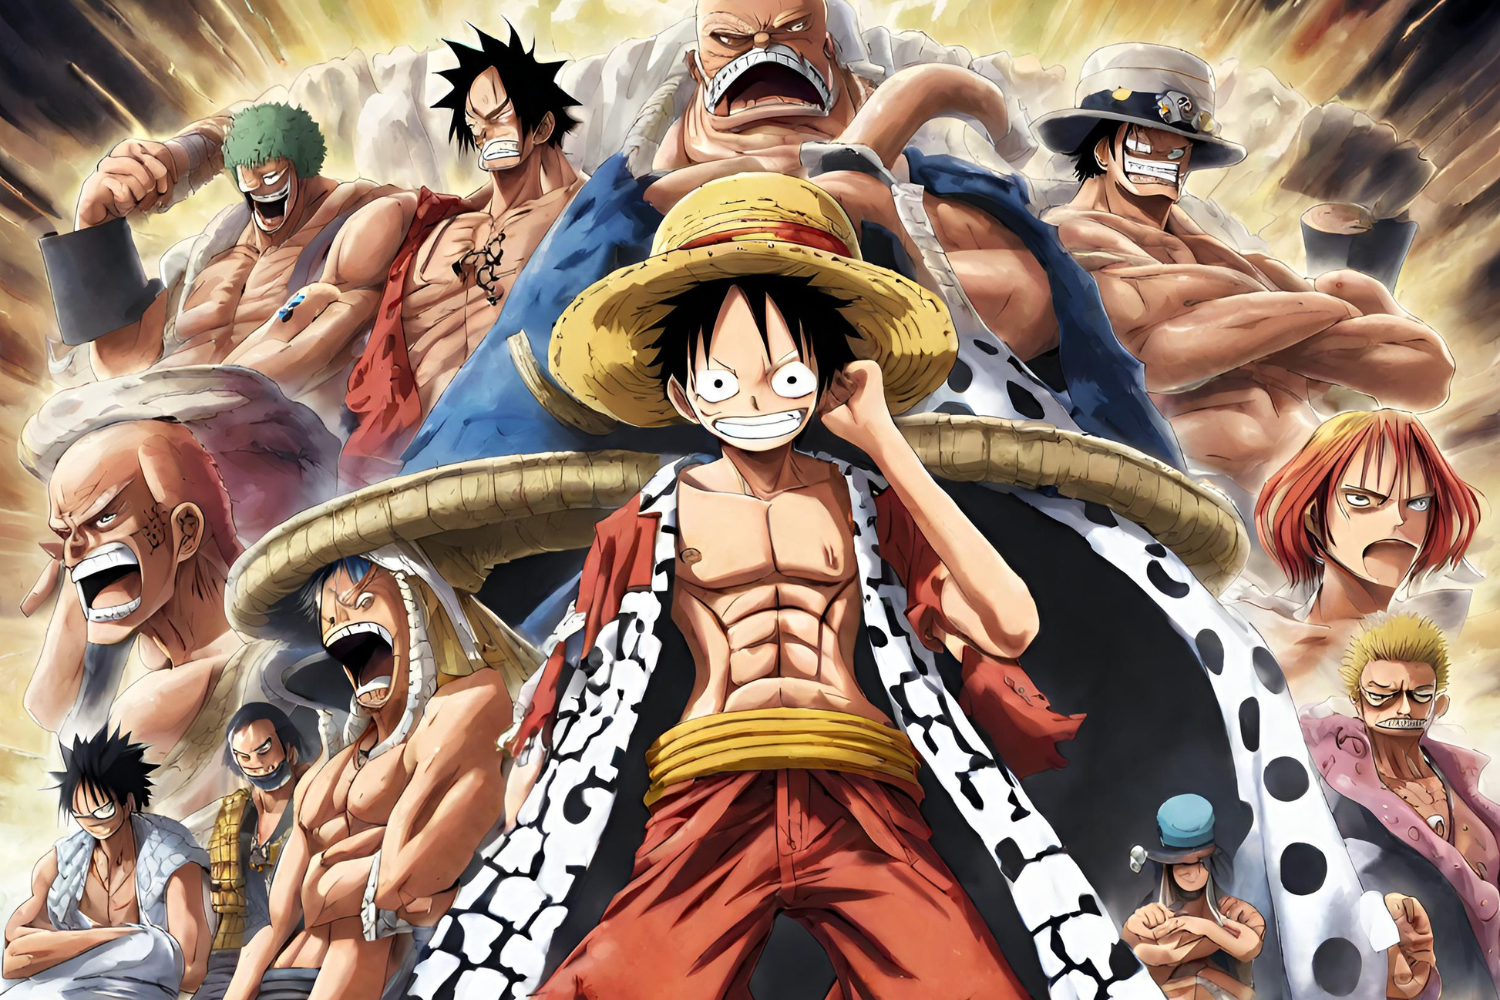 Strongest Characters in One Piece